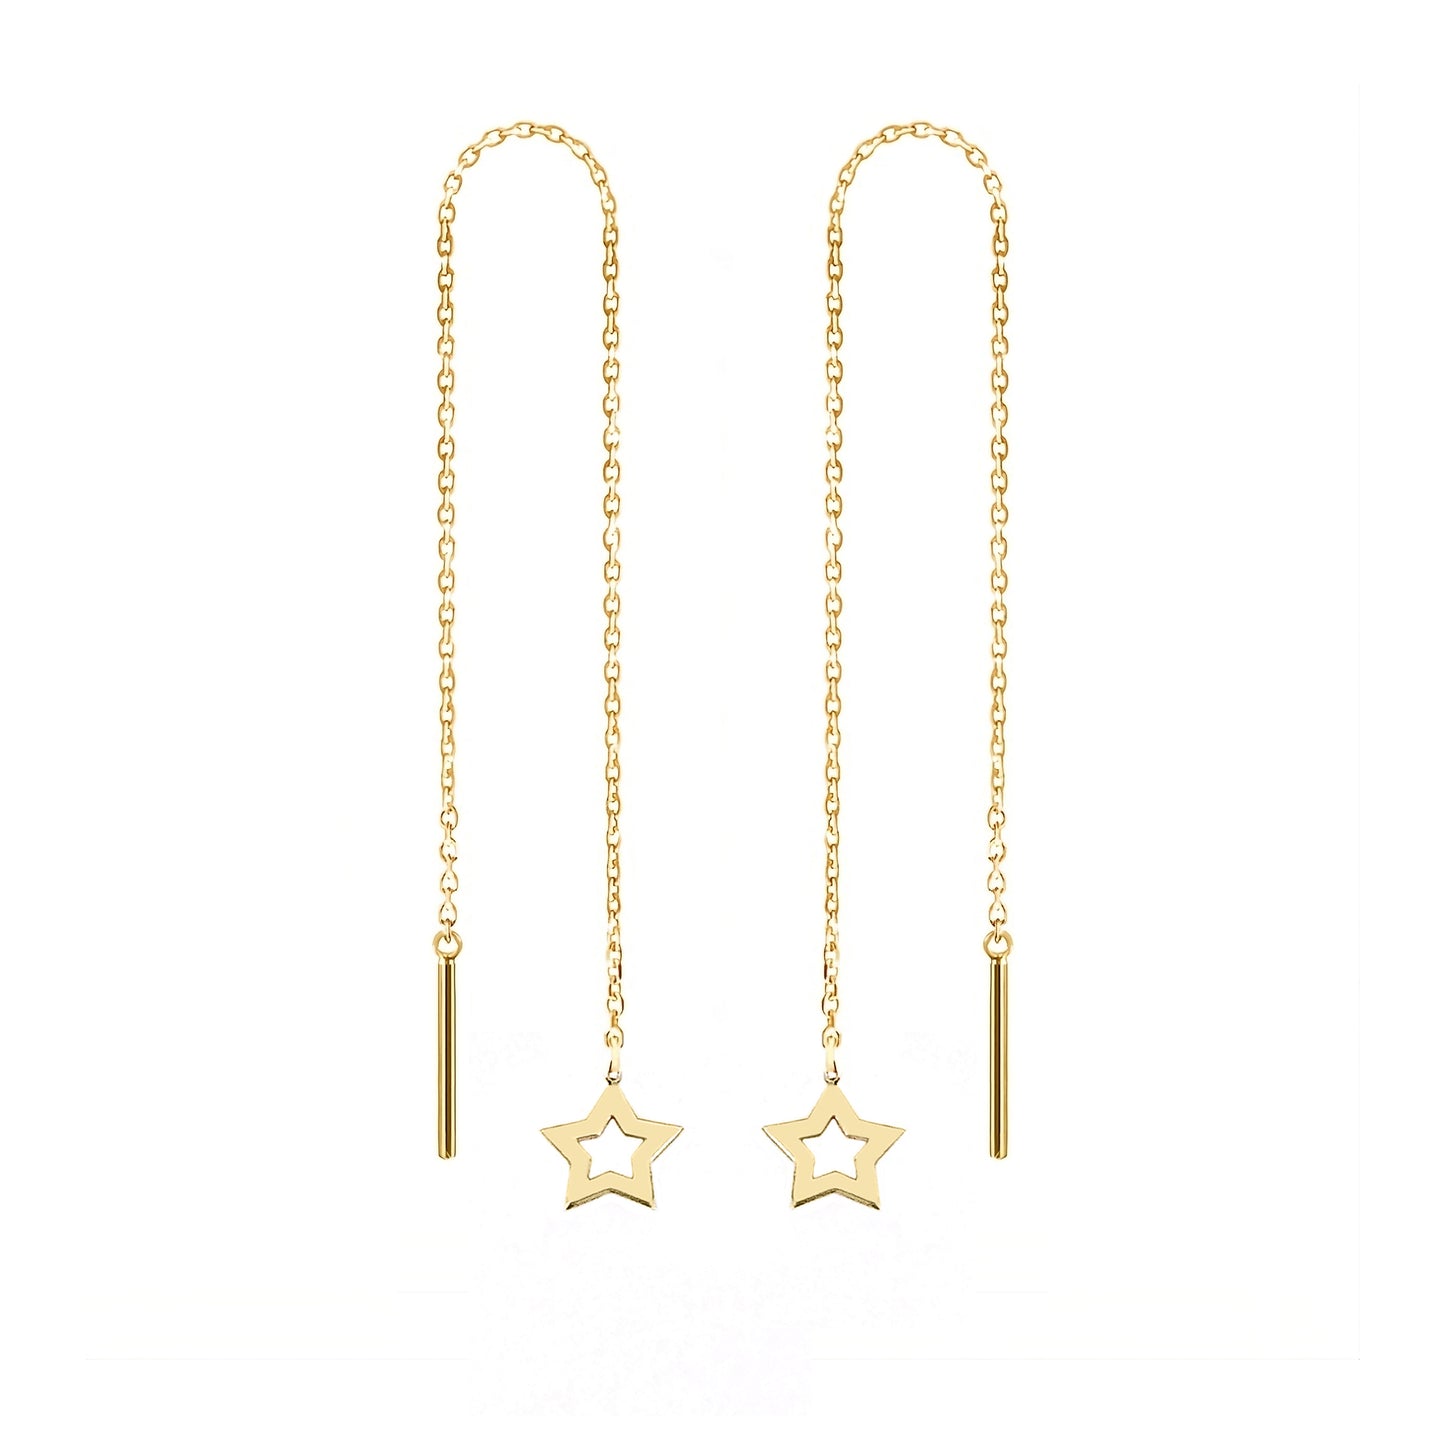 Solid Gold Threader Earrings with a Dainty Star